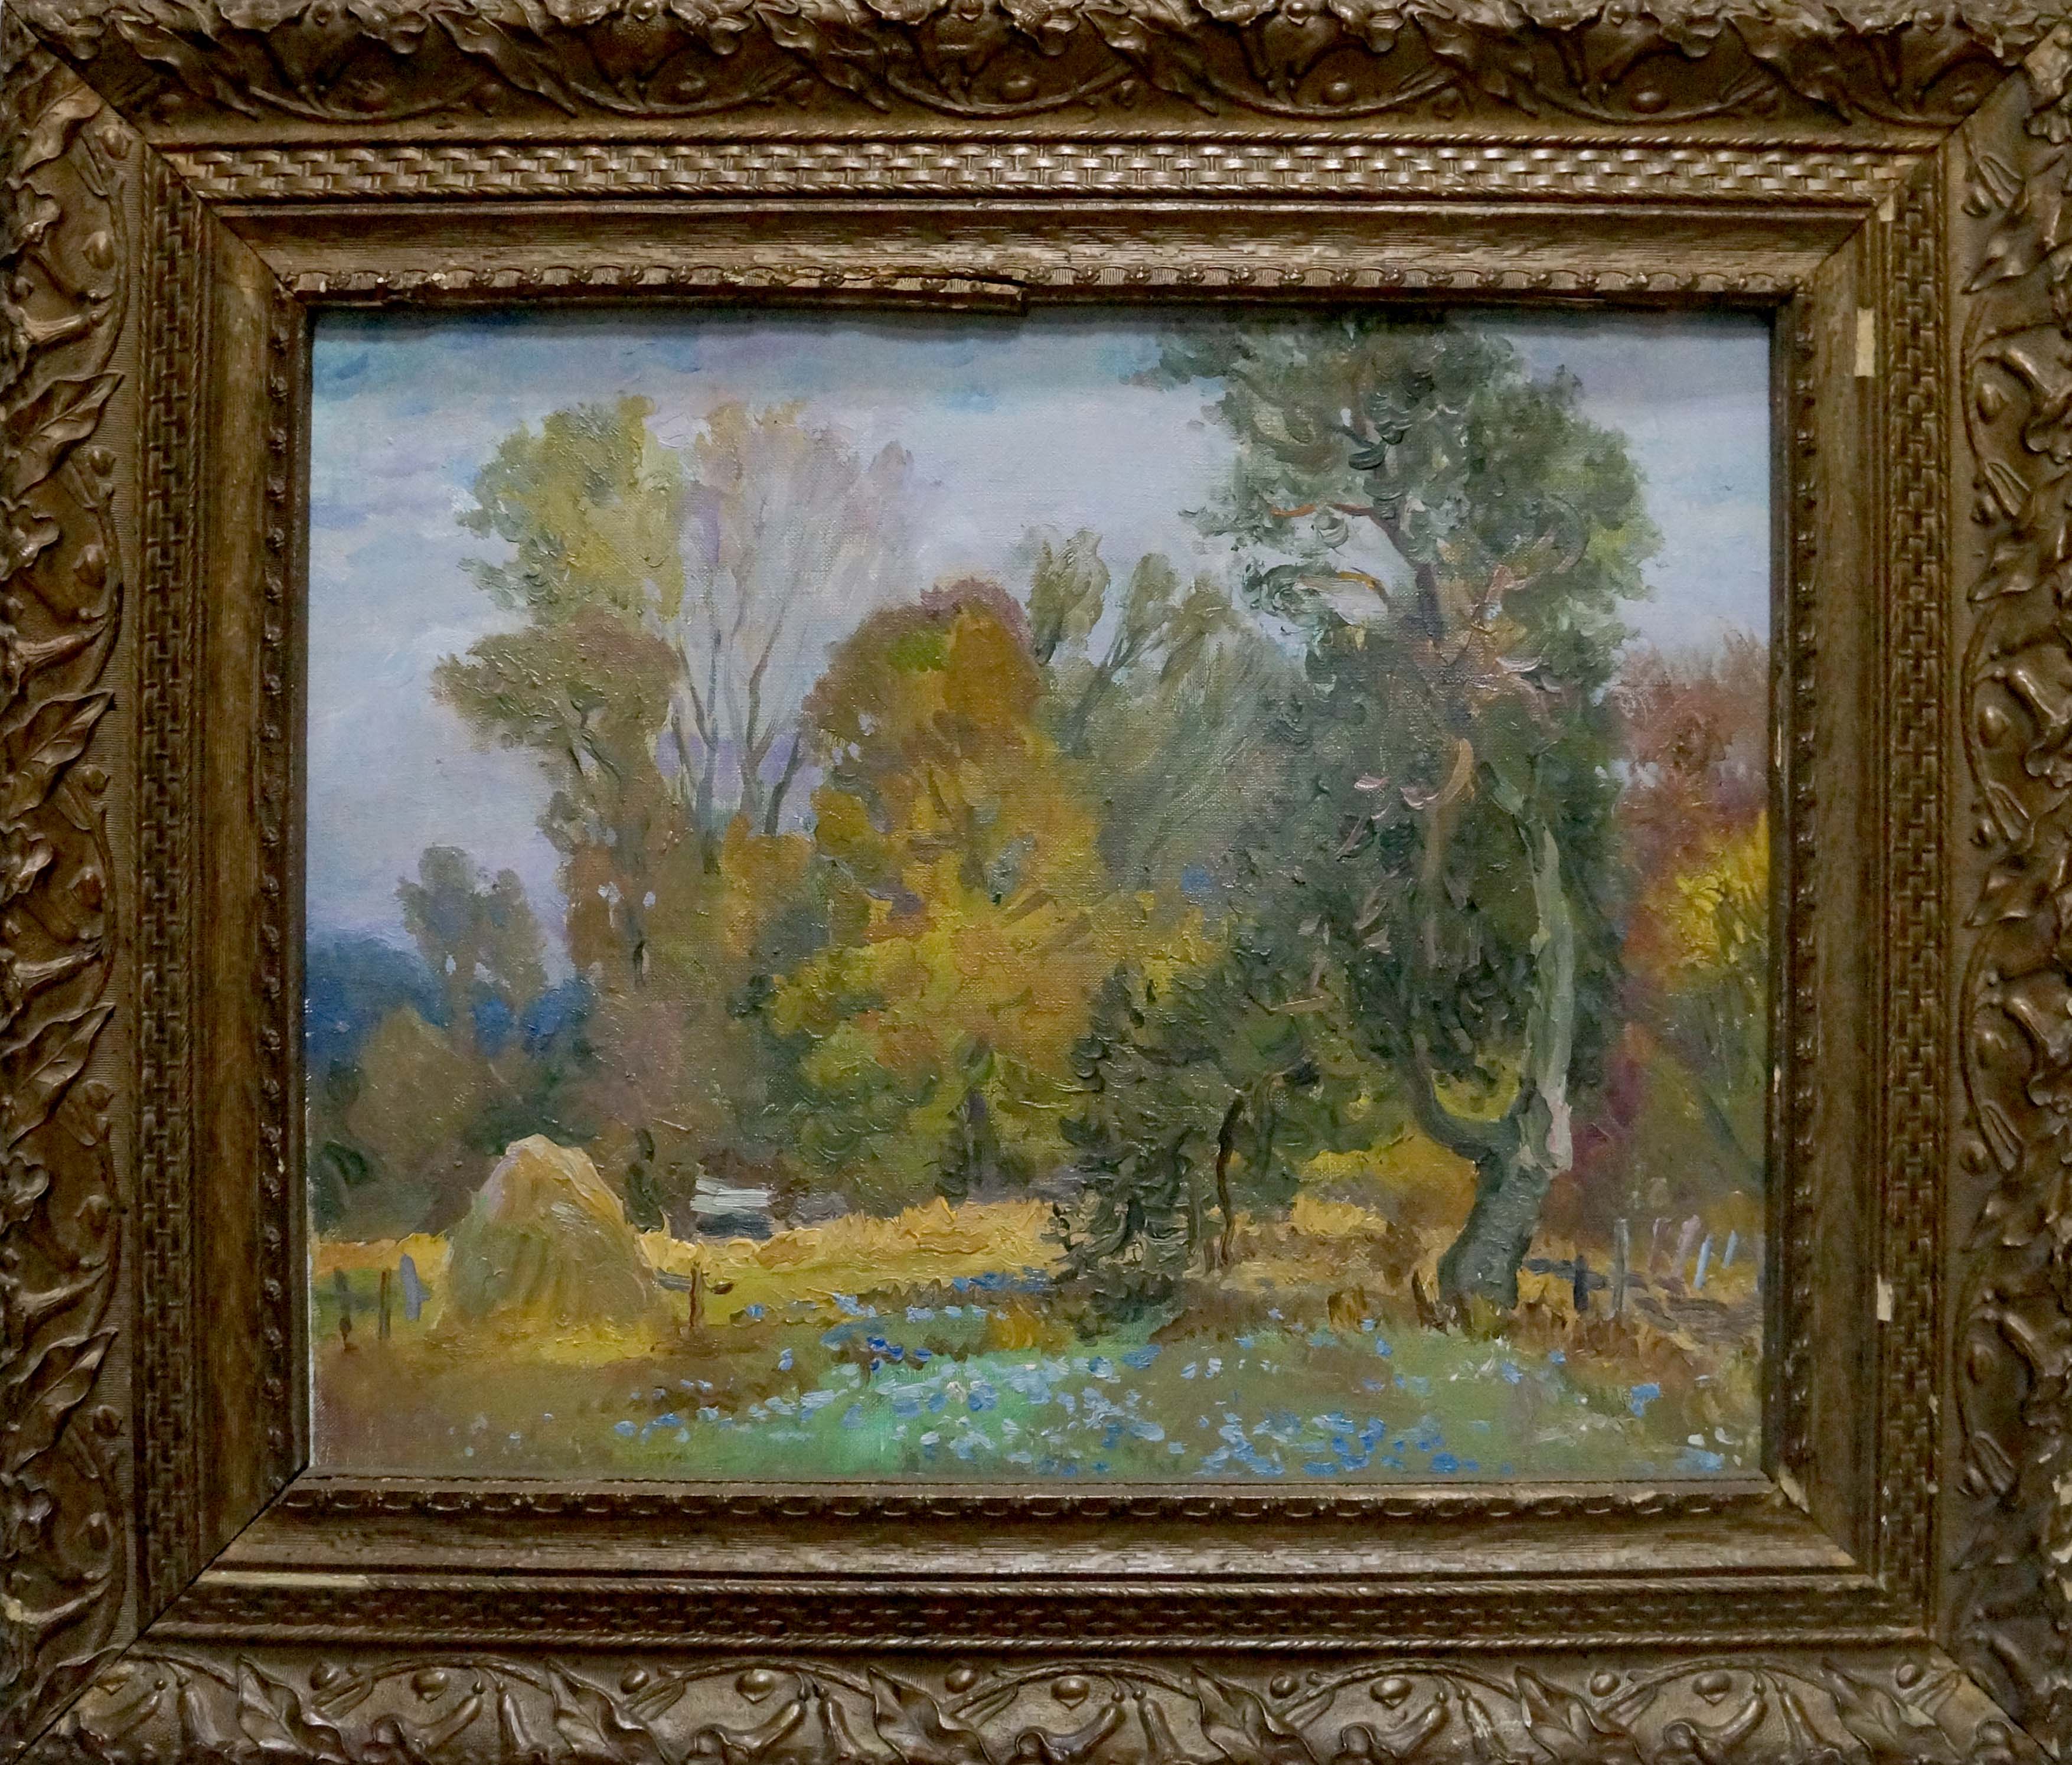 Oil painting Autumn Forestscape Unknown artist